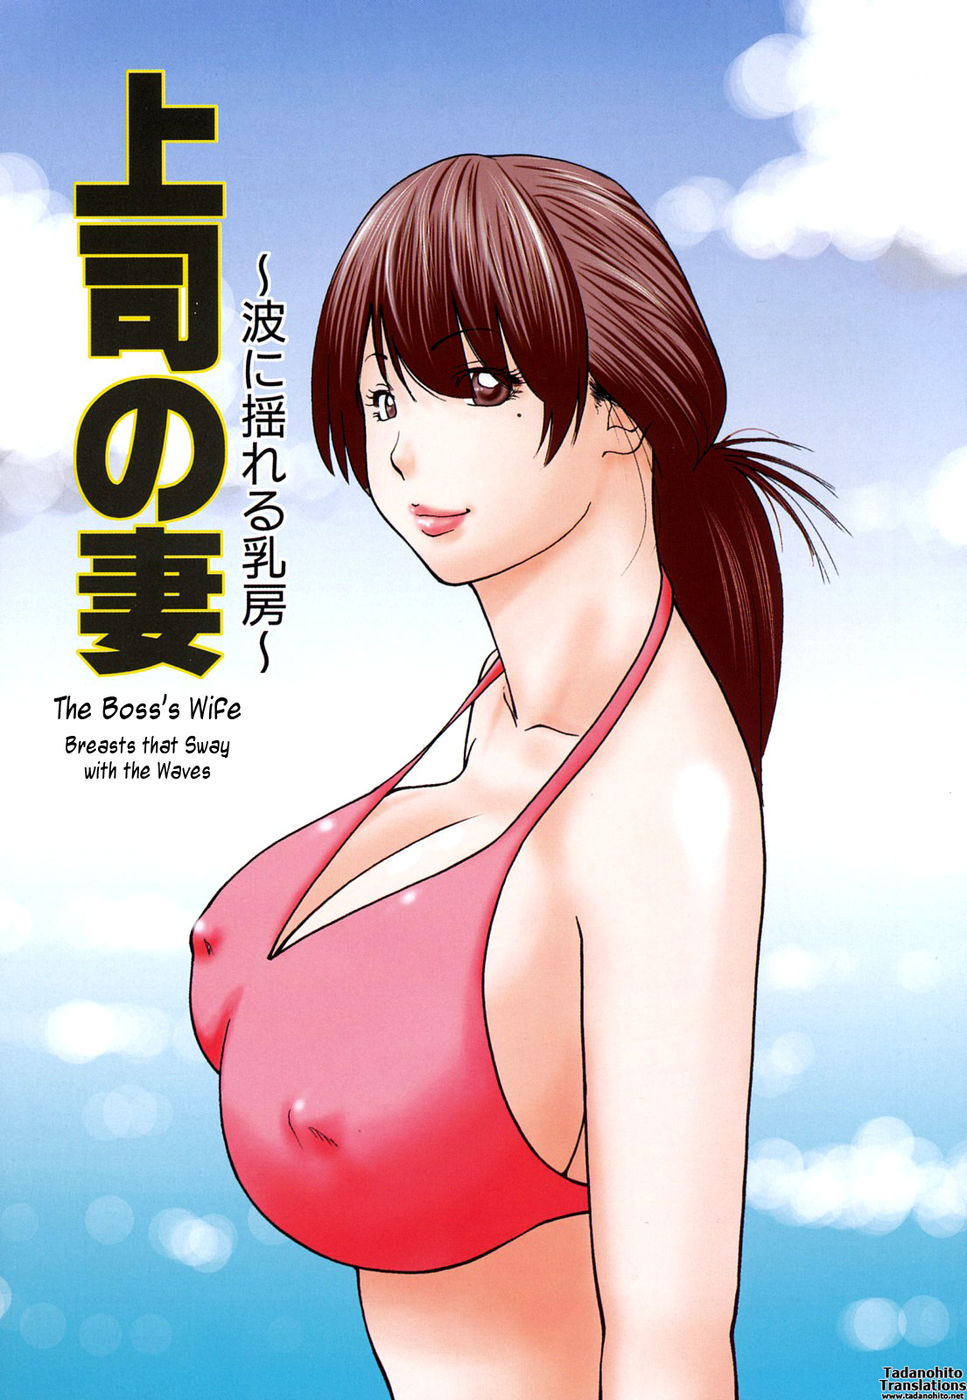 Young Wife and High School Girl Collection-Chapter 5-The Bosss Wife-Breasts That Sway With The Waves-Hentai Manga Hentai Comic